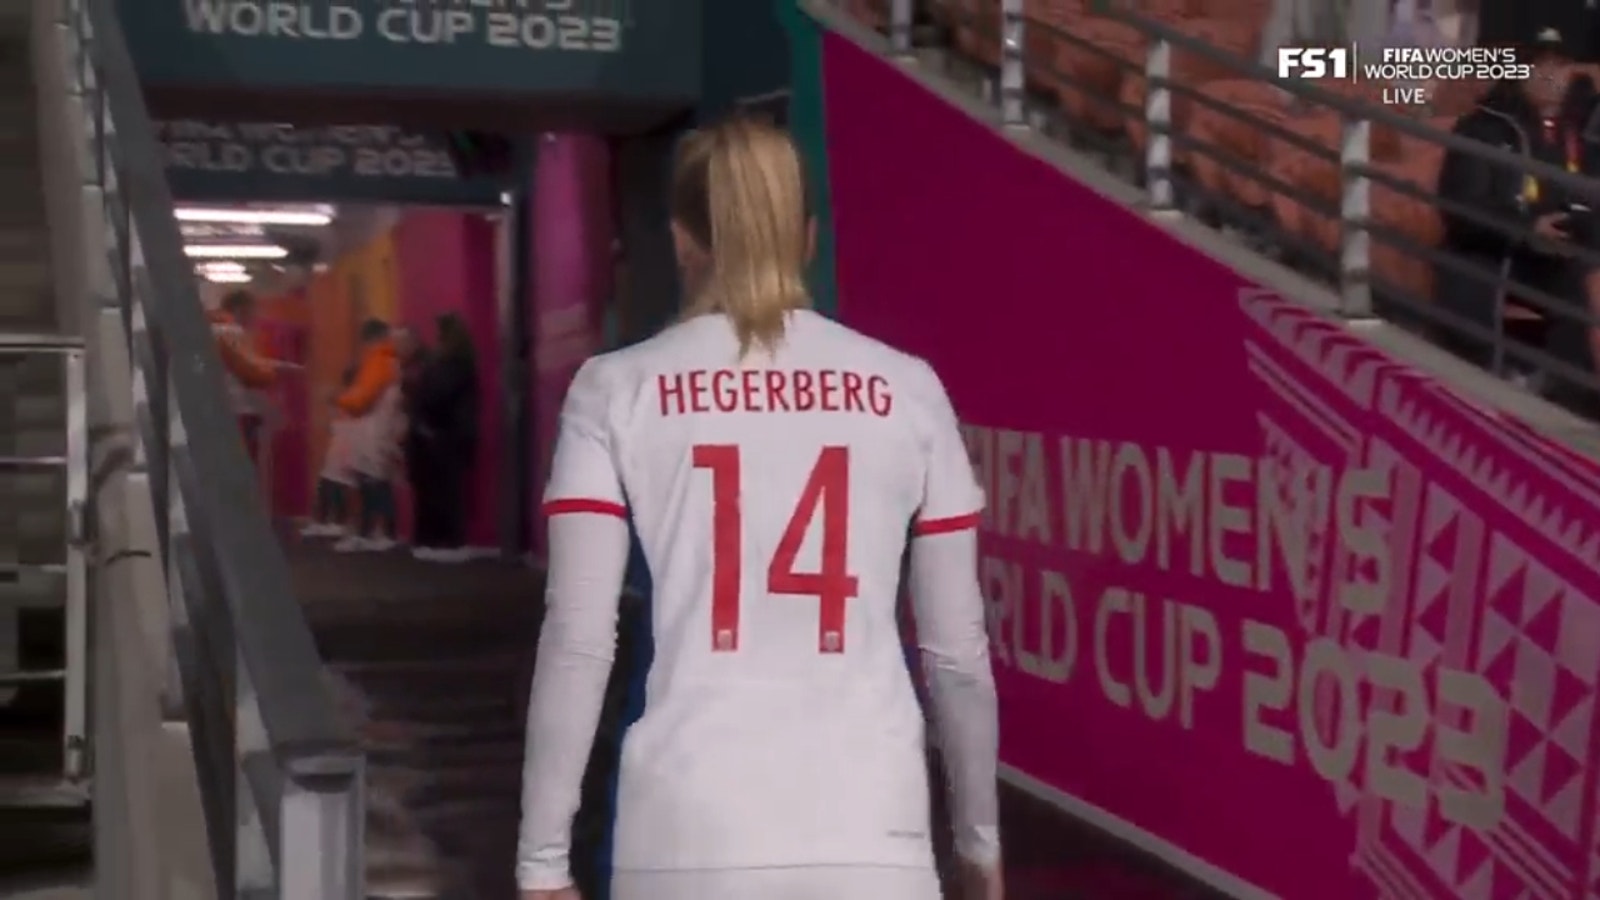 Norwegian star Ada Hegerberg was seen walking back to the tunnel before the match against Switzerland.